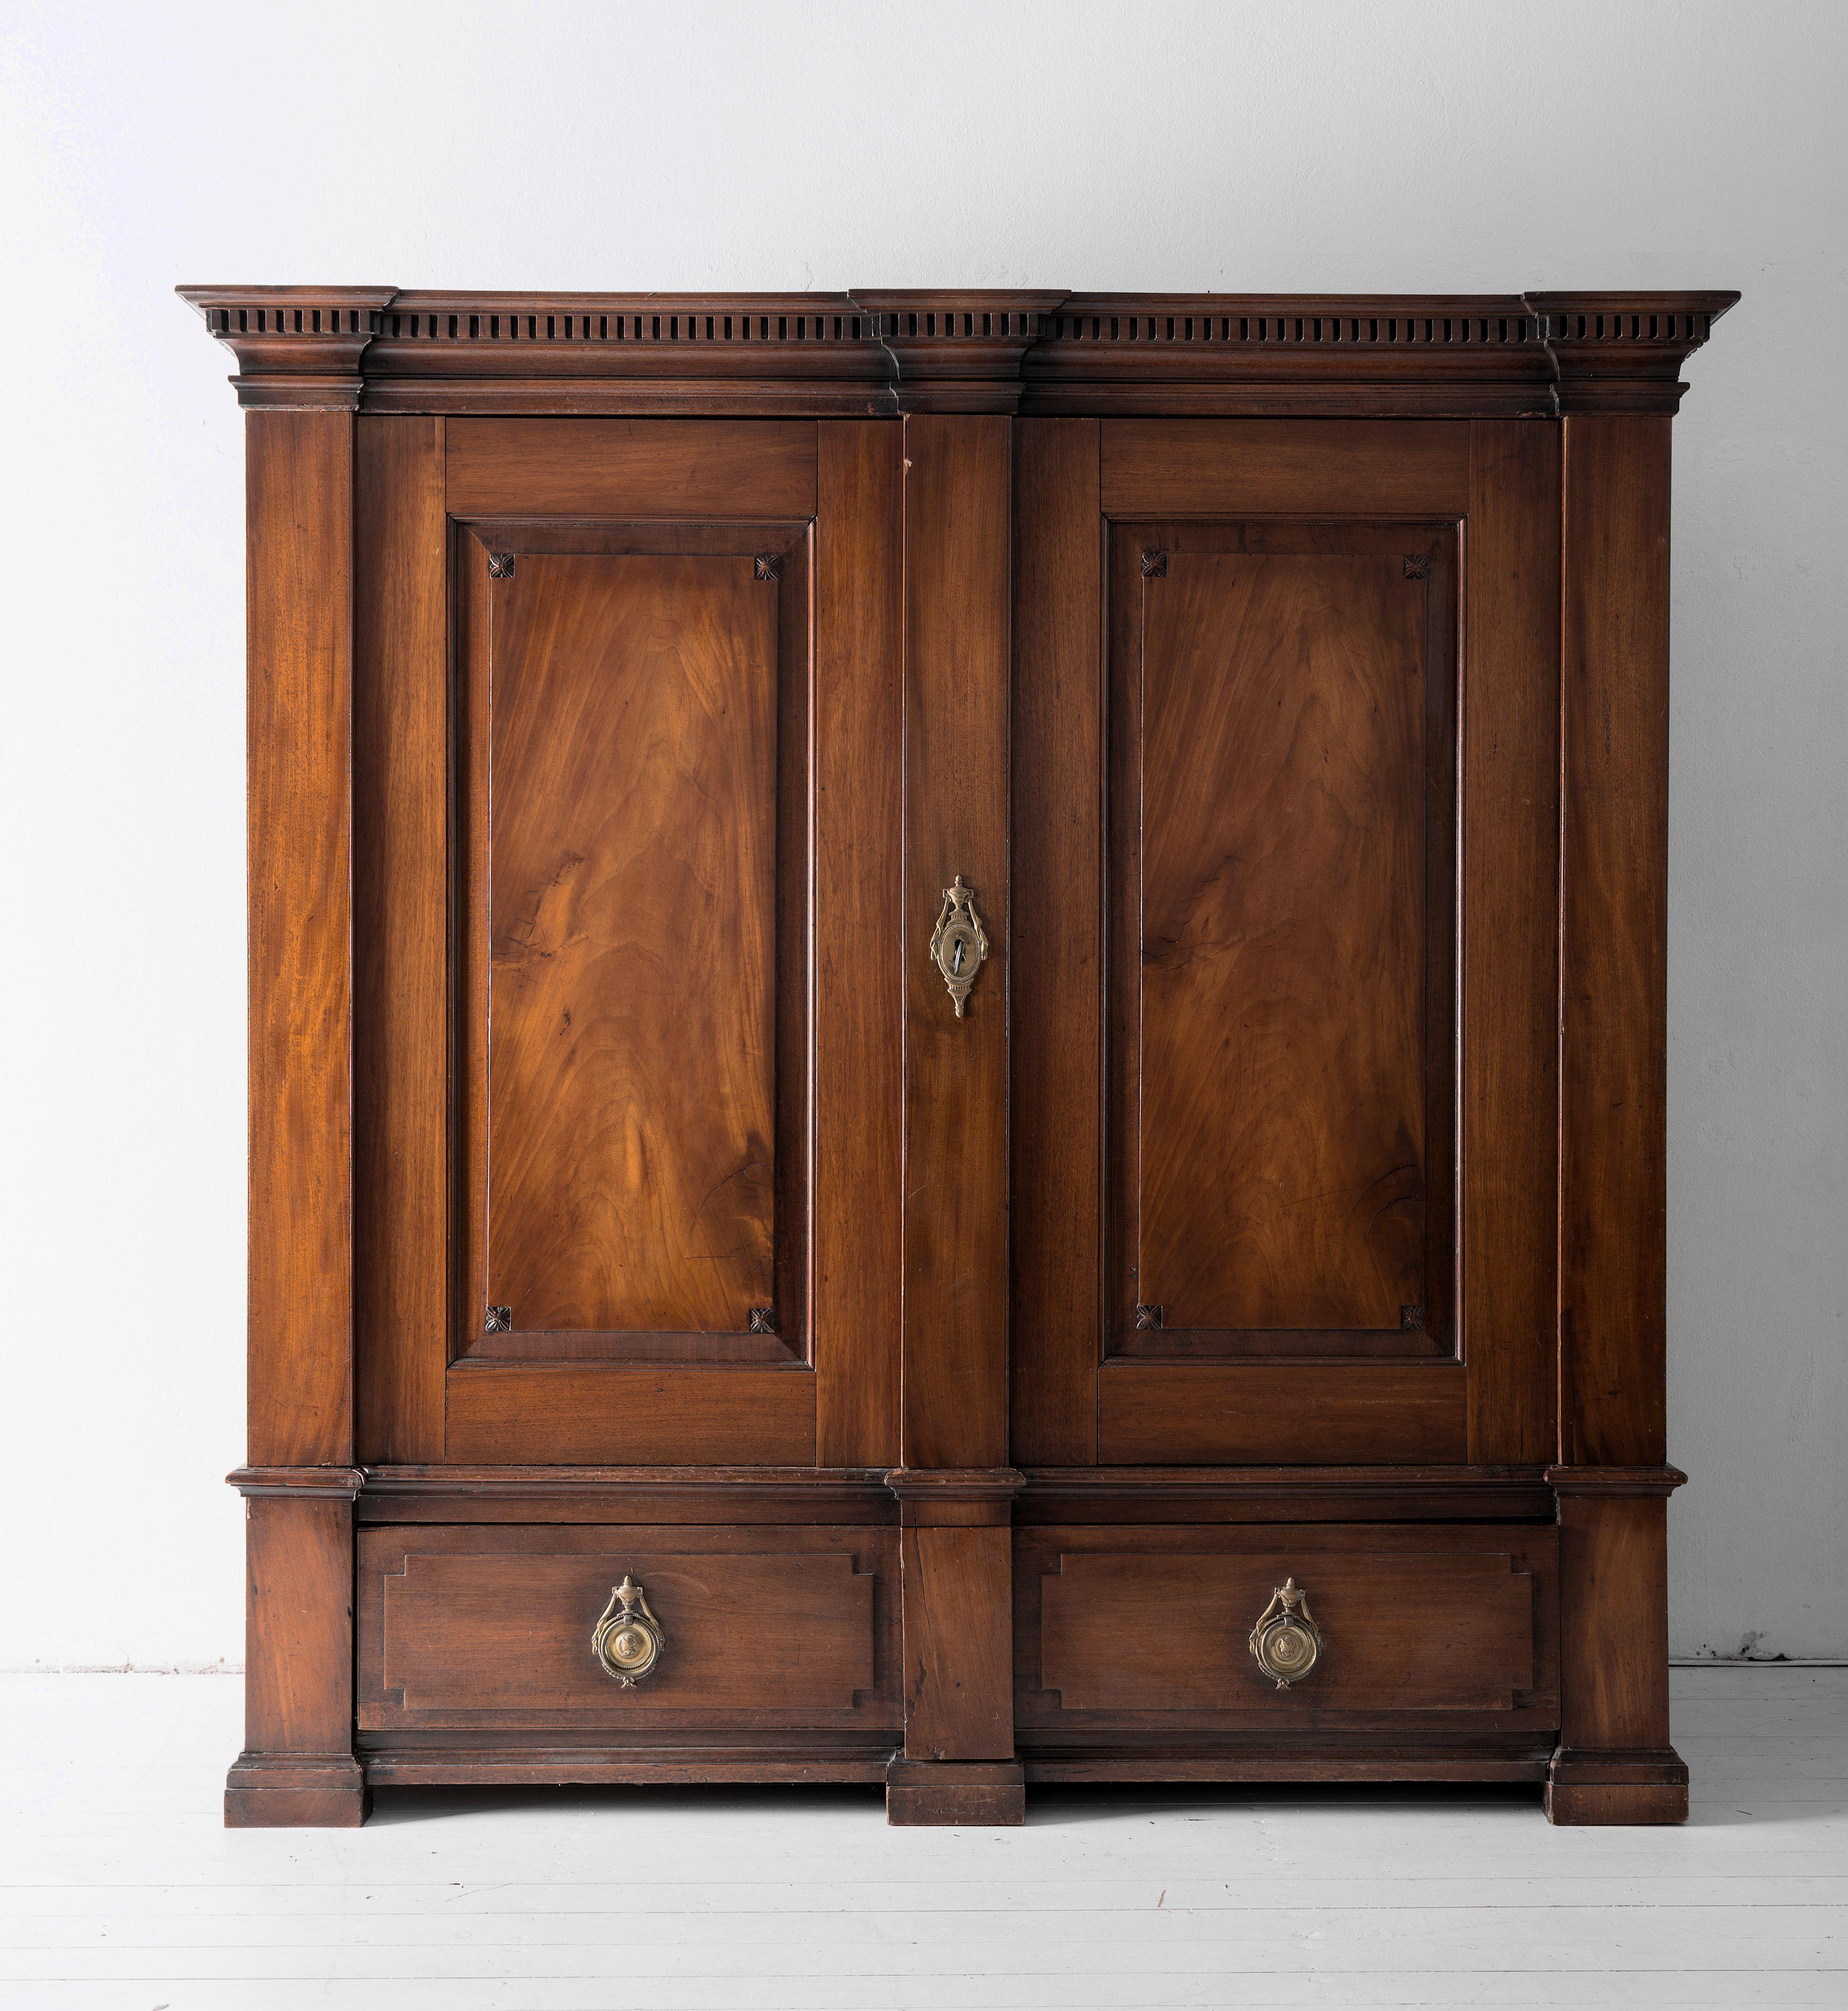 A very impressive and simple late 18th century linen cupboard or armoire of pleasing proportions and a good, authentic finish to the Mahogany, not too shiny or to distressed, retaining its original giltbronze mounts. This would work equally well as